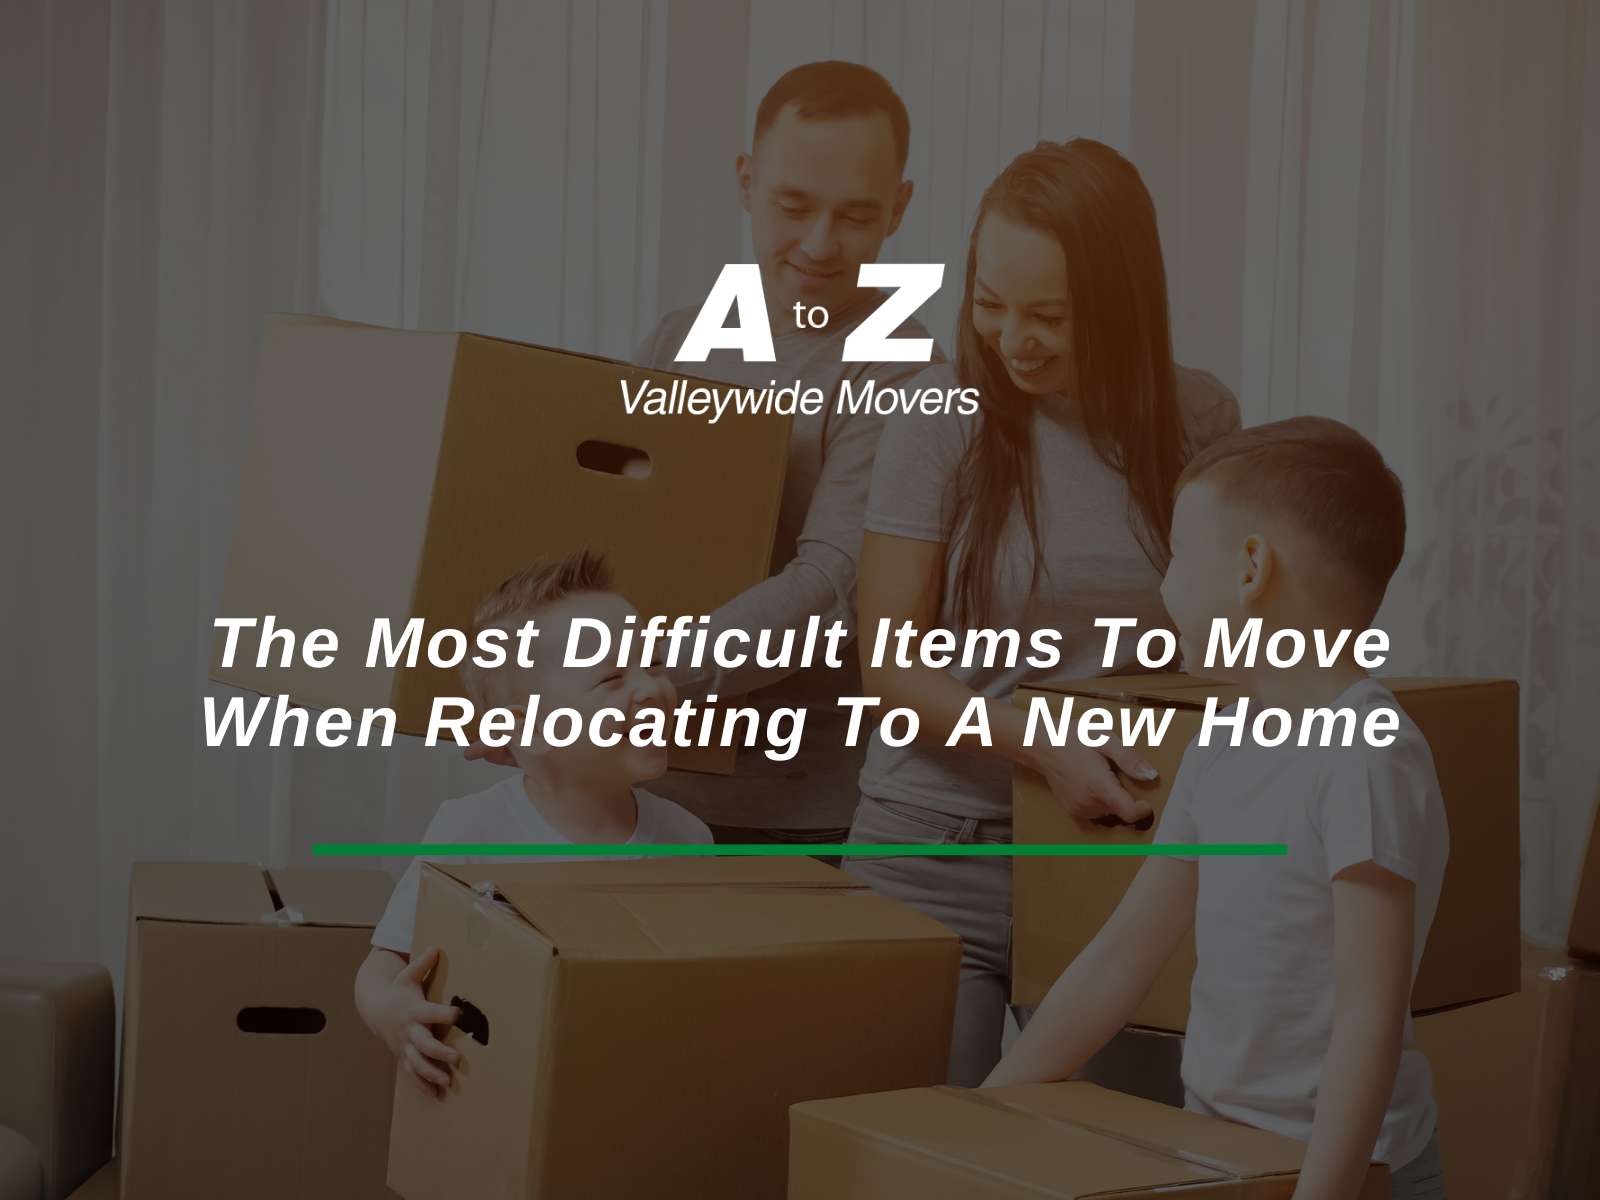 The Most Difficult Items To Move When Relocating To A New Home